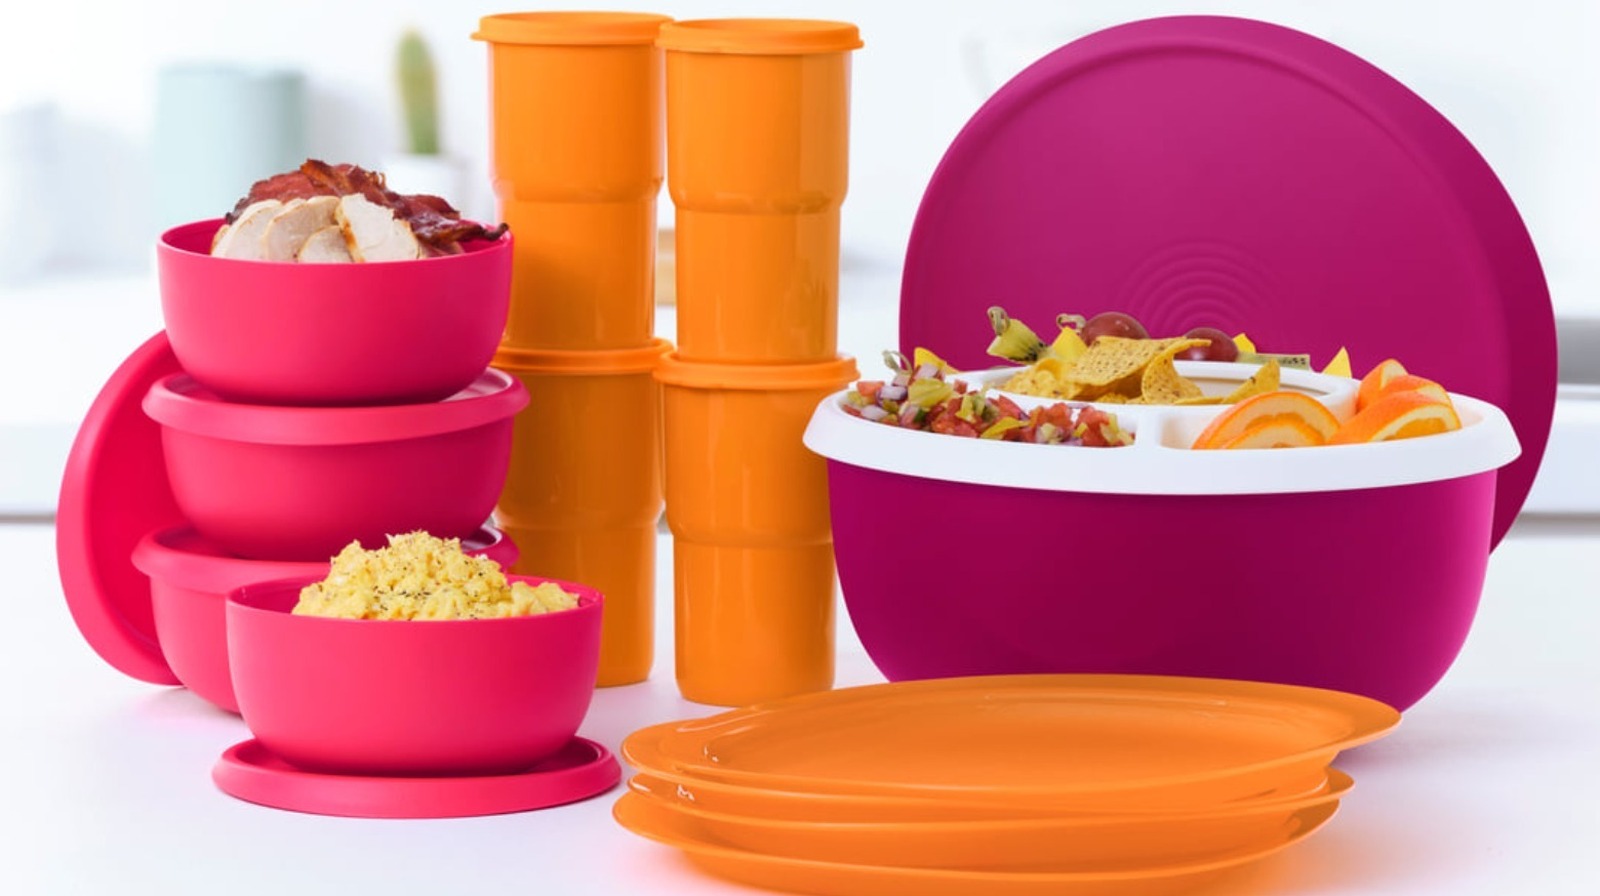 Why is everyone buying Tupperware?